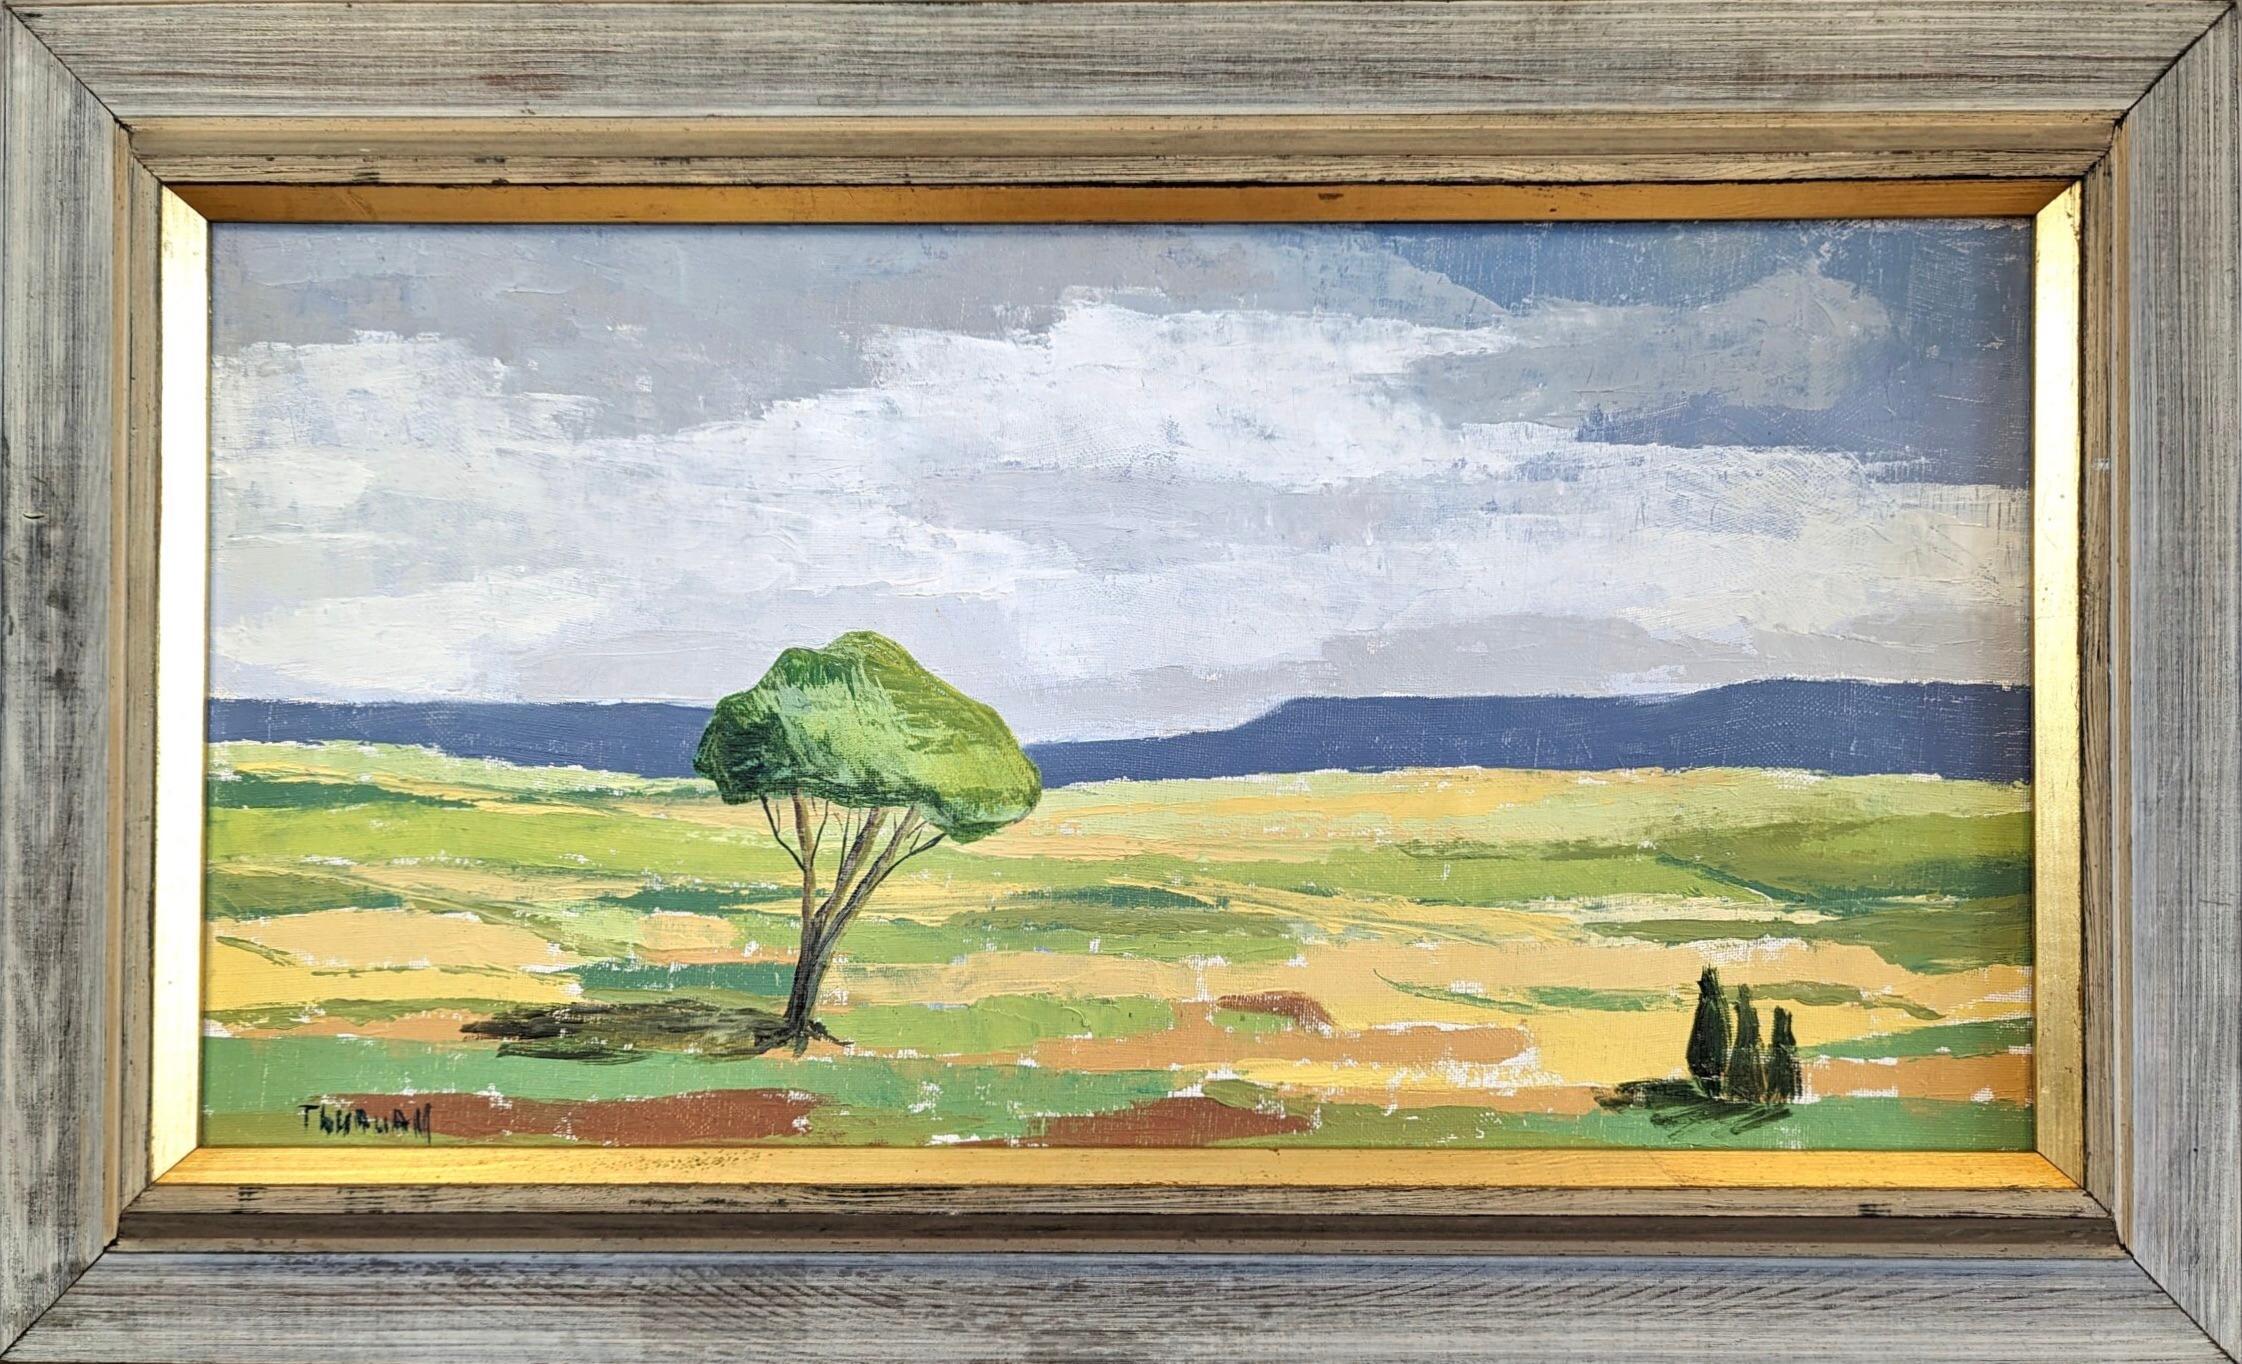 Unknown Landscape Painting - Vintage Mid-Century Modern Landscape Framed Oil Painting - The Green Tree